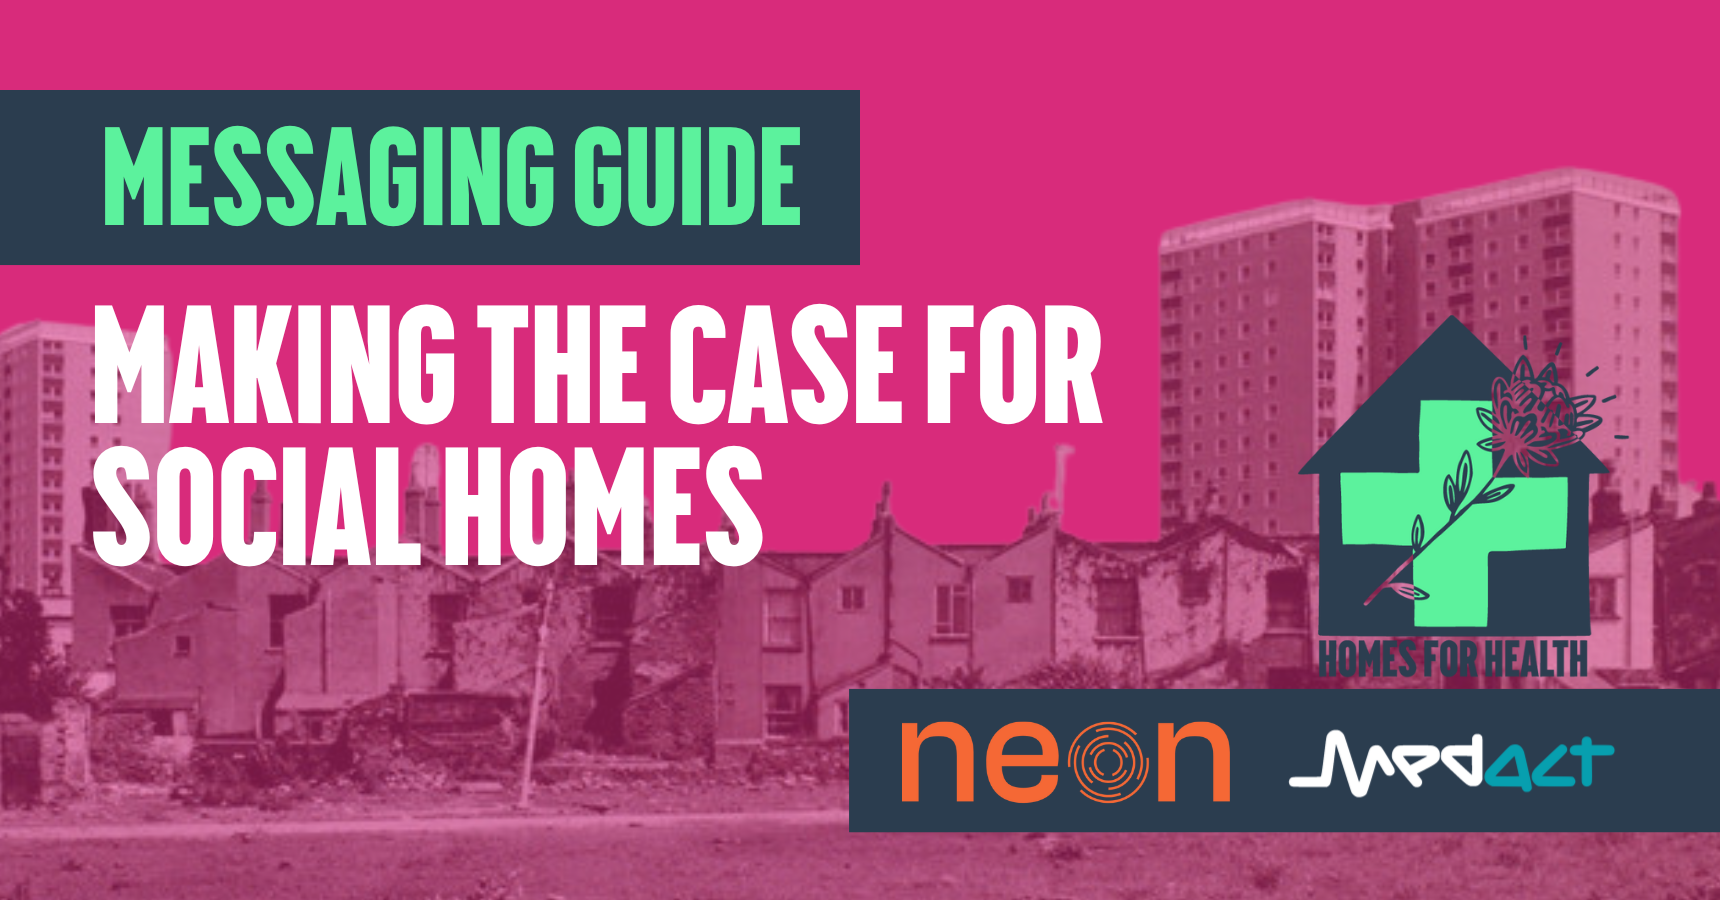 Messaging Guide: Making the Case for Social Homes